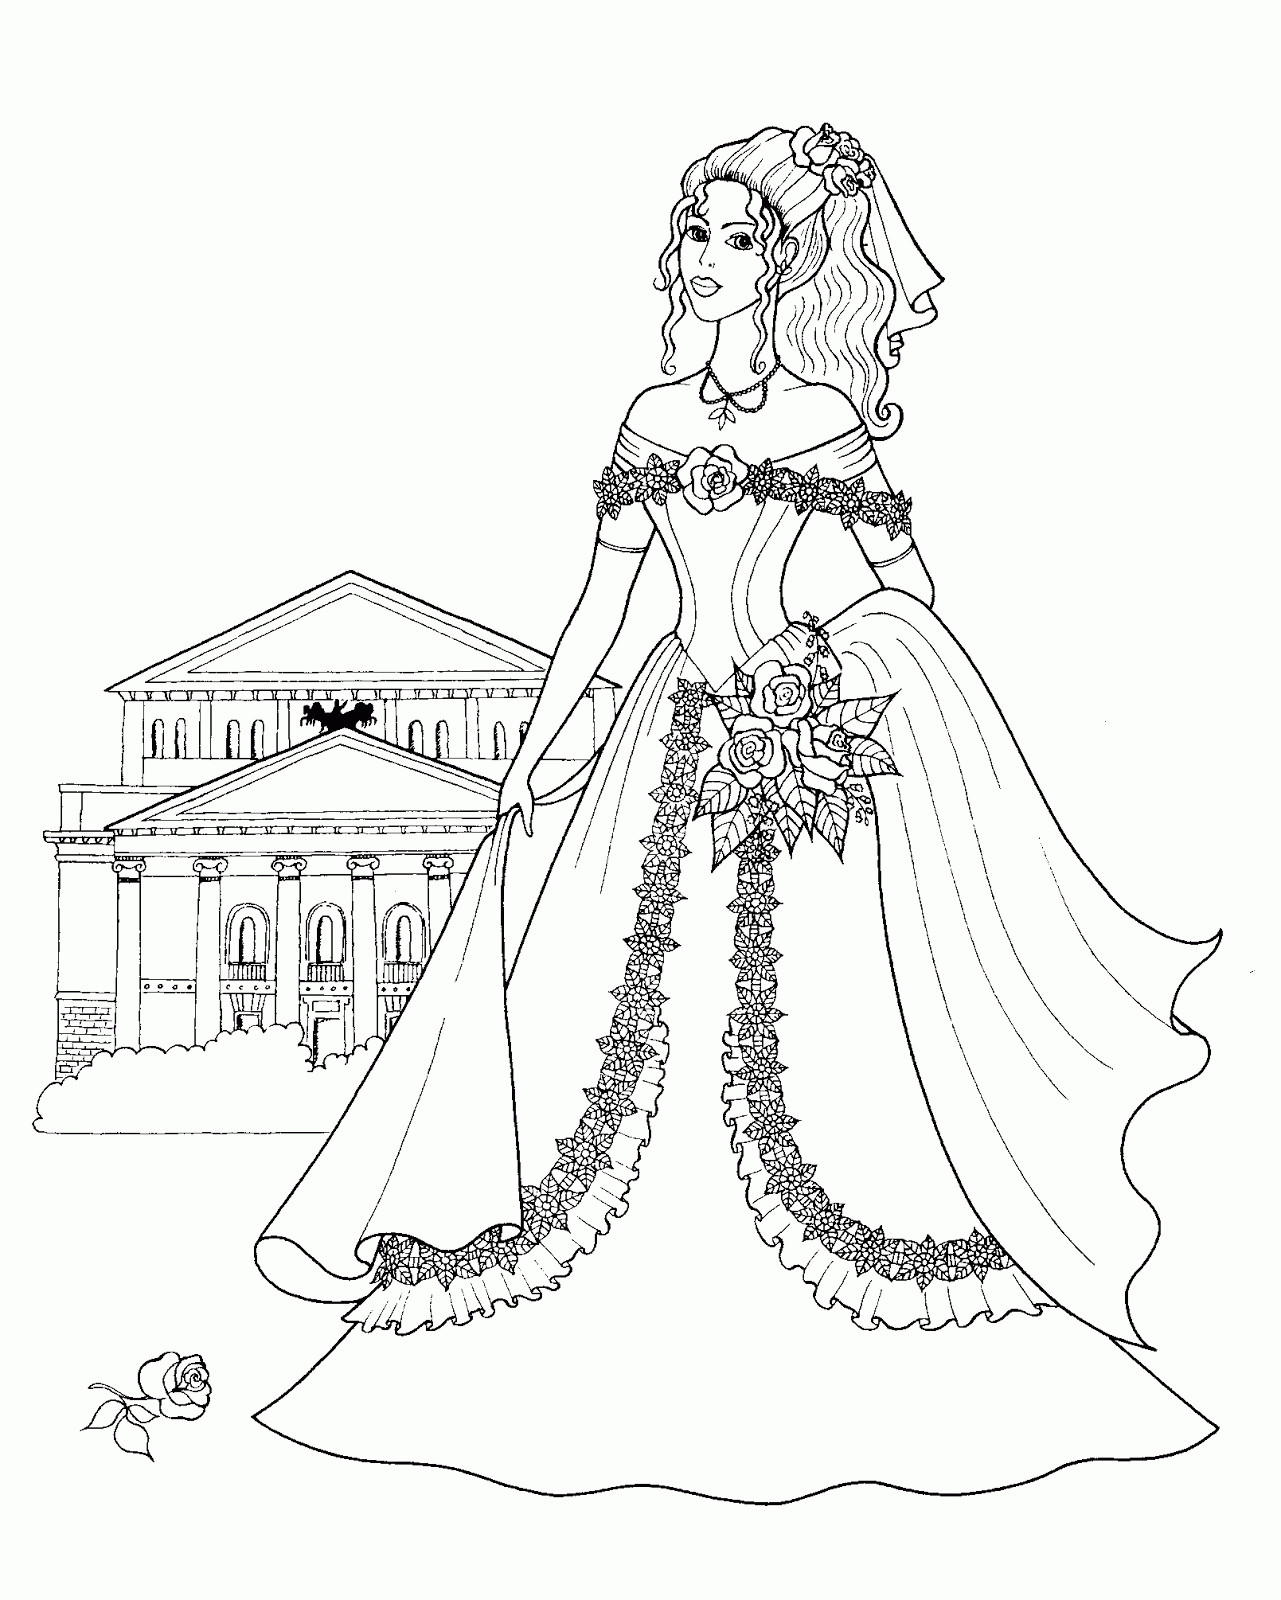 Fashion Coloring Pages For Girls
 Coloring Pages Fashionable Girls free printable coloring